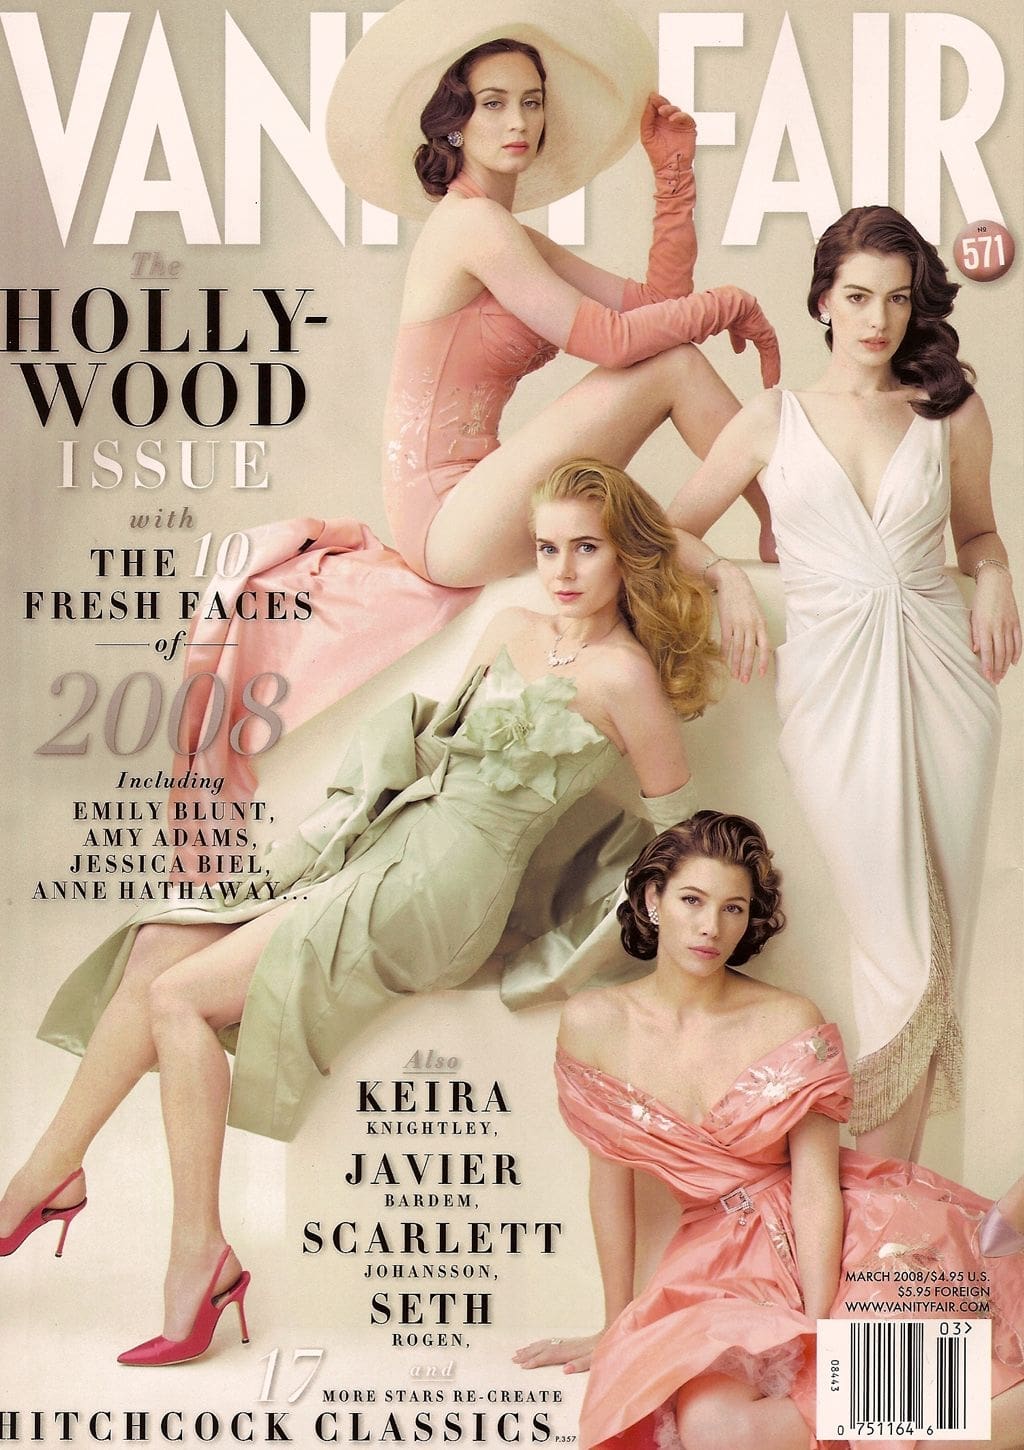 Emily Blunt, Amy Adams, Jessica Biel, and Anne Hathaway on the cover of Vanity Fair's March 2008 The Hollywood Issue